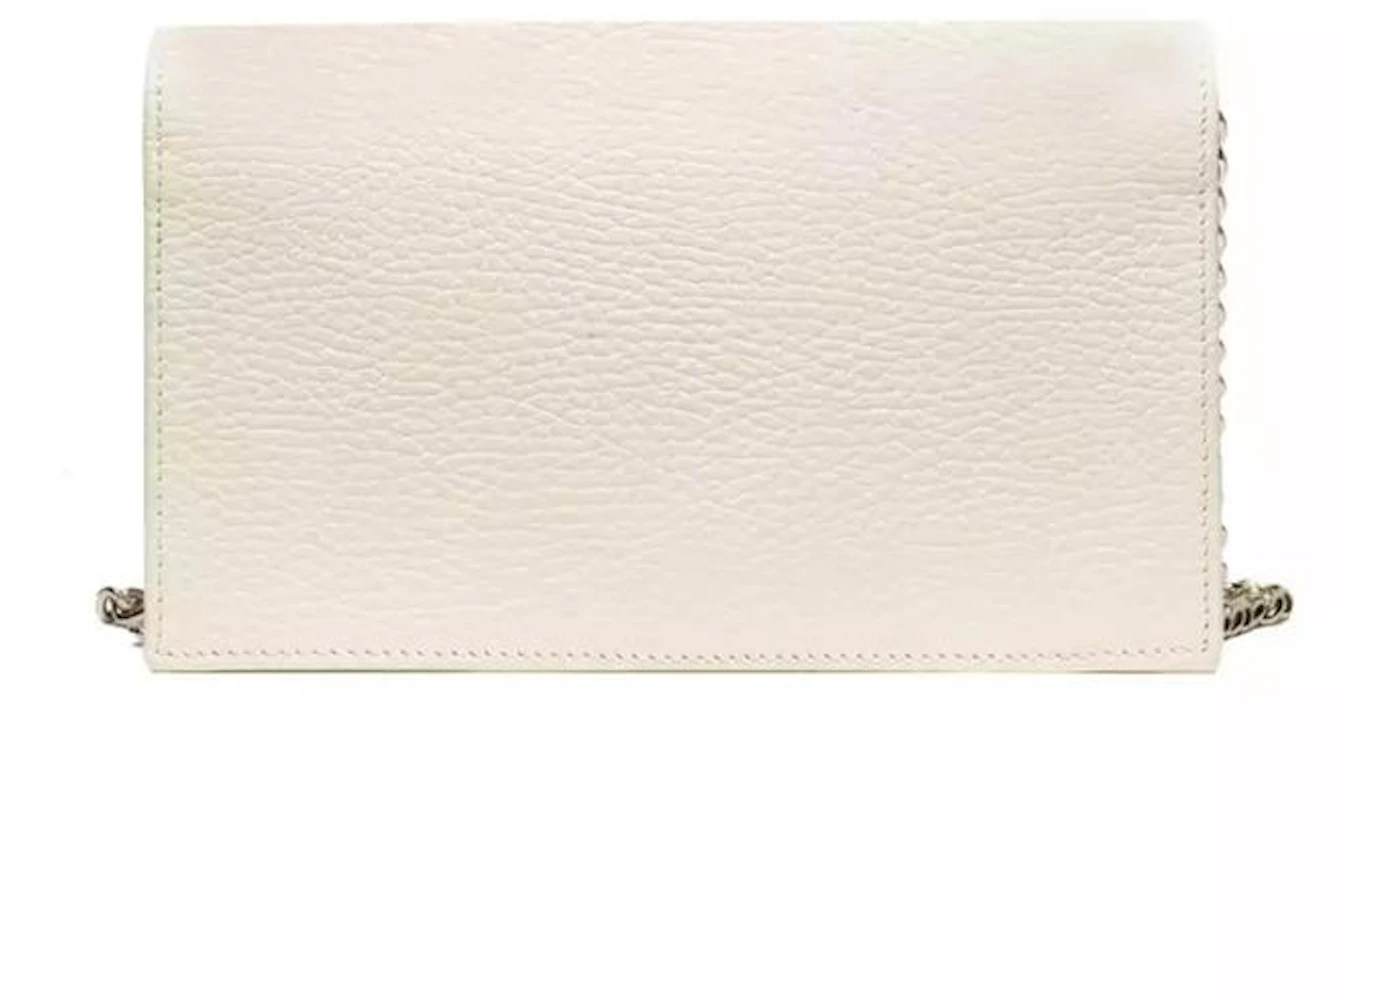 Gucci Interlocking GG Chain Crossbody Bag White in Leather with Gold ...